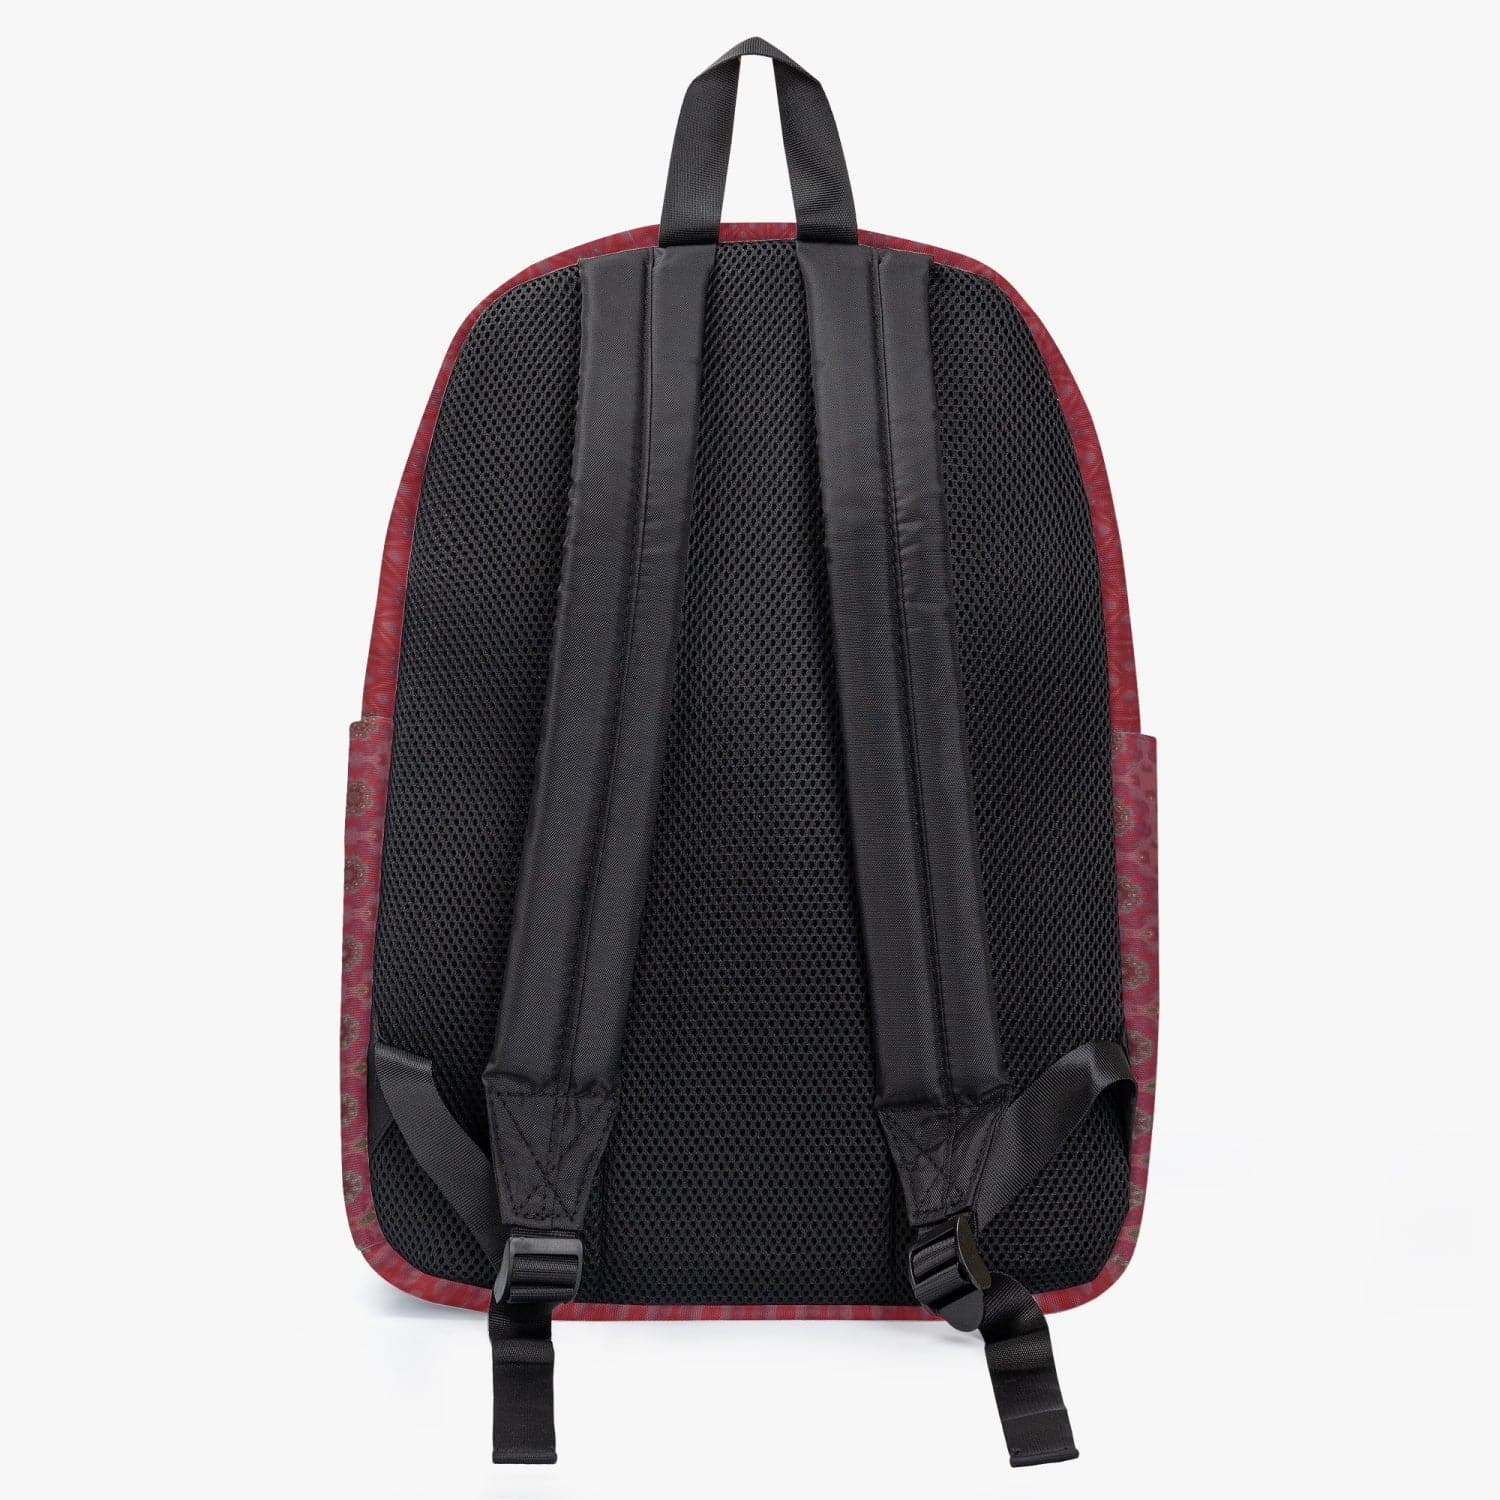 Red Wine Fine rosy patterned Cotton Canvas Backpack, by Sensus Studio Design